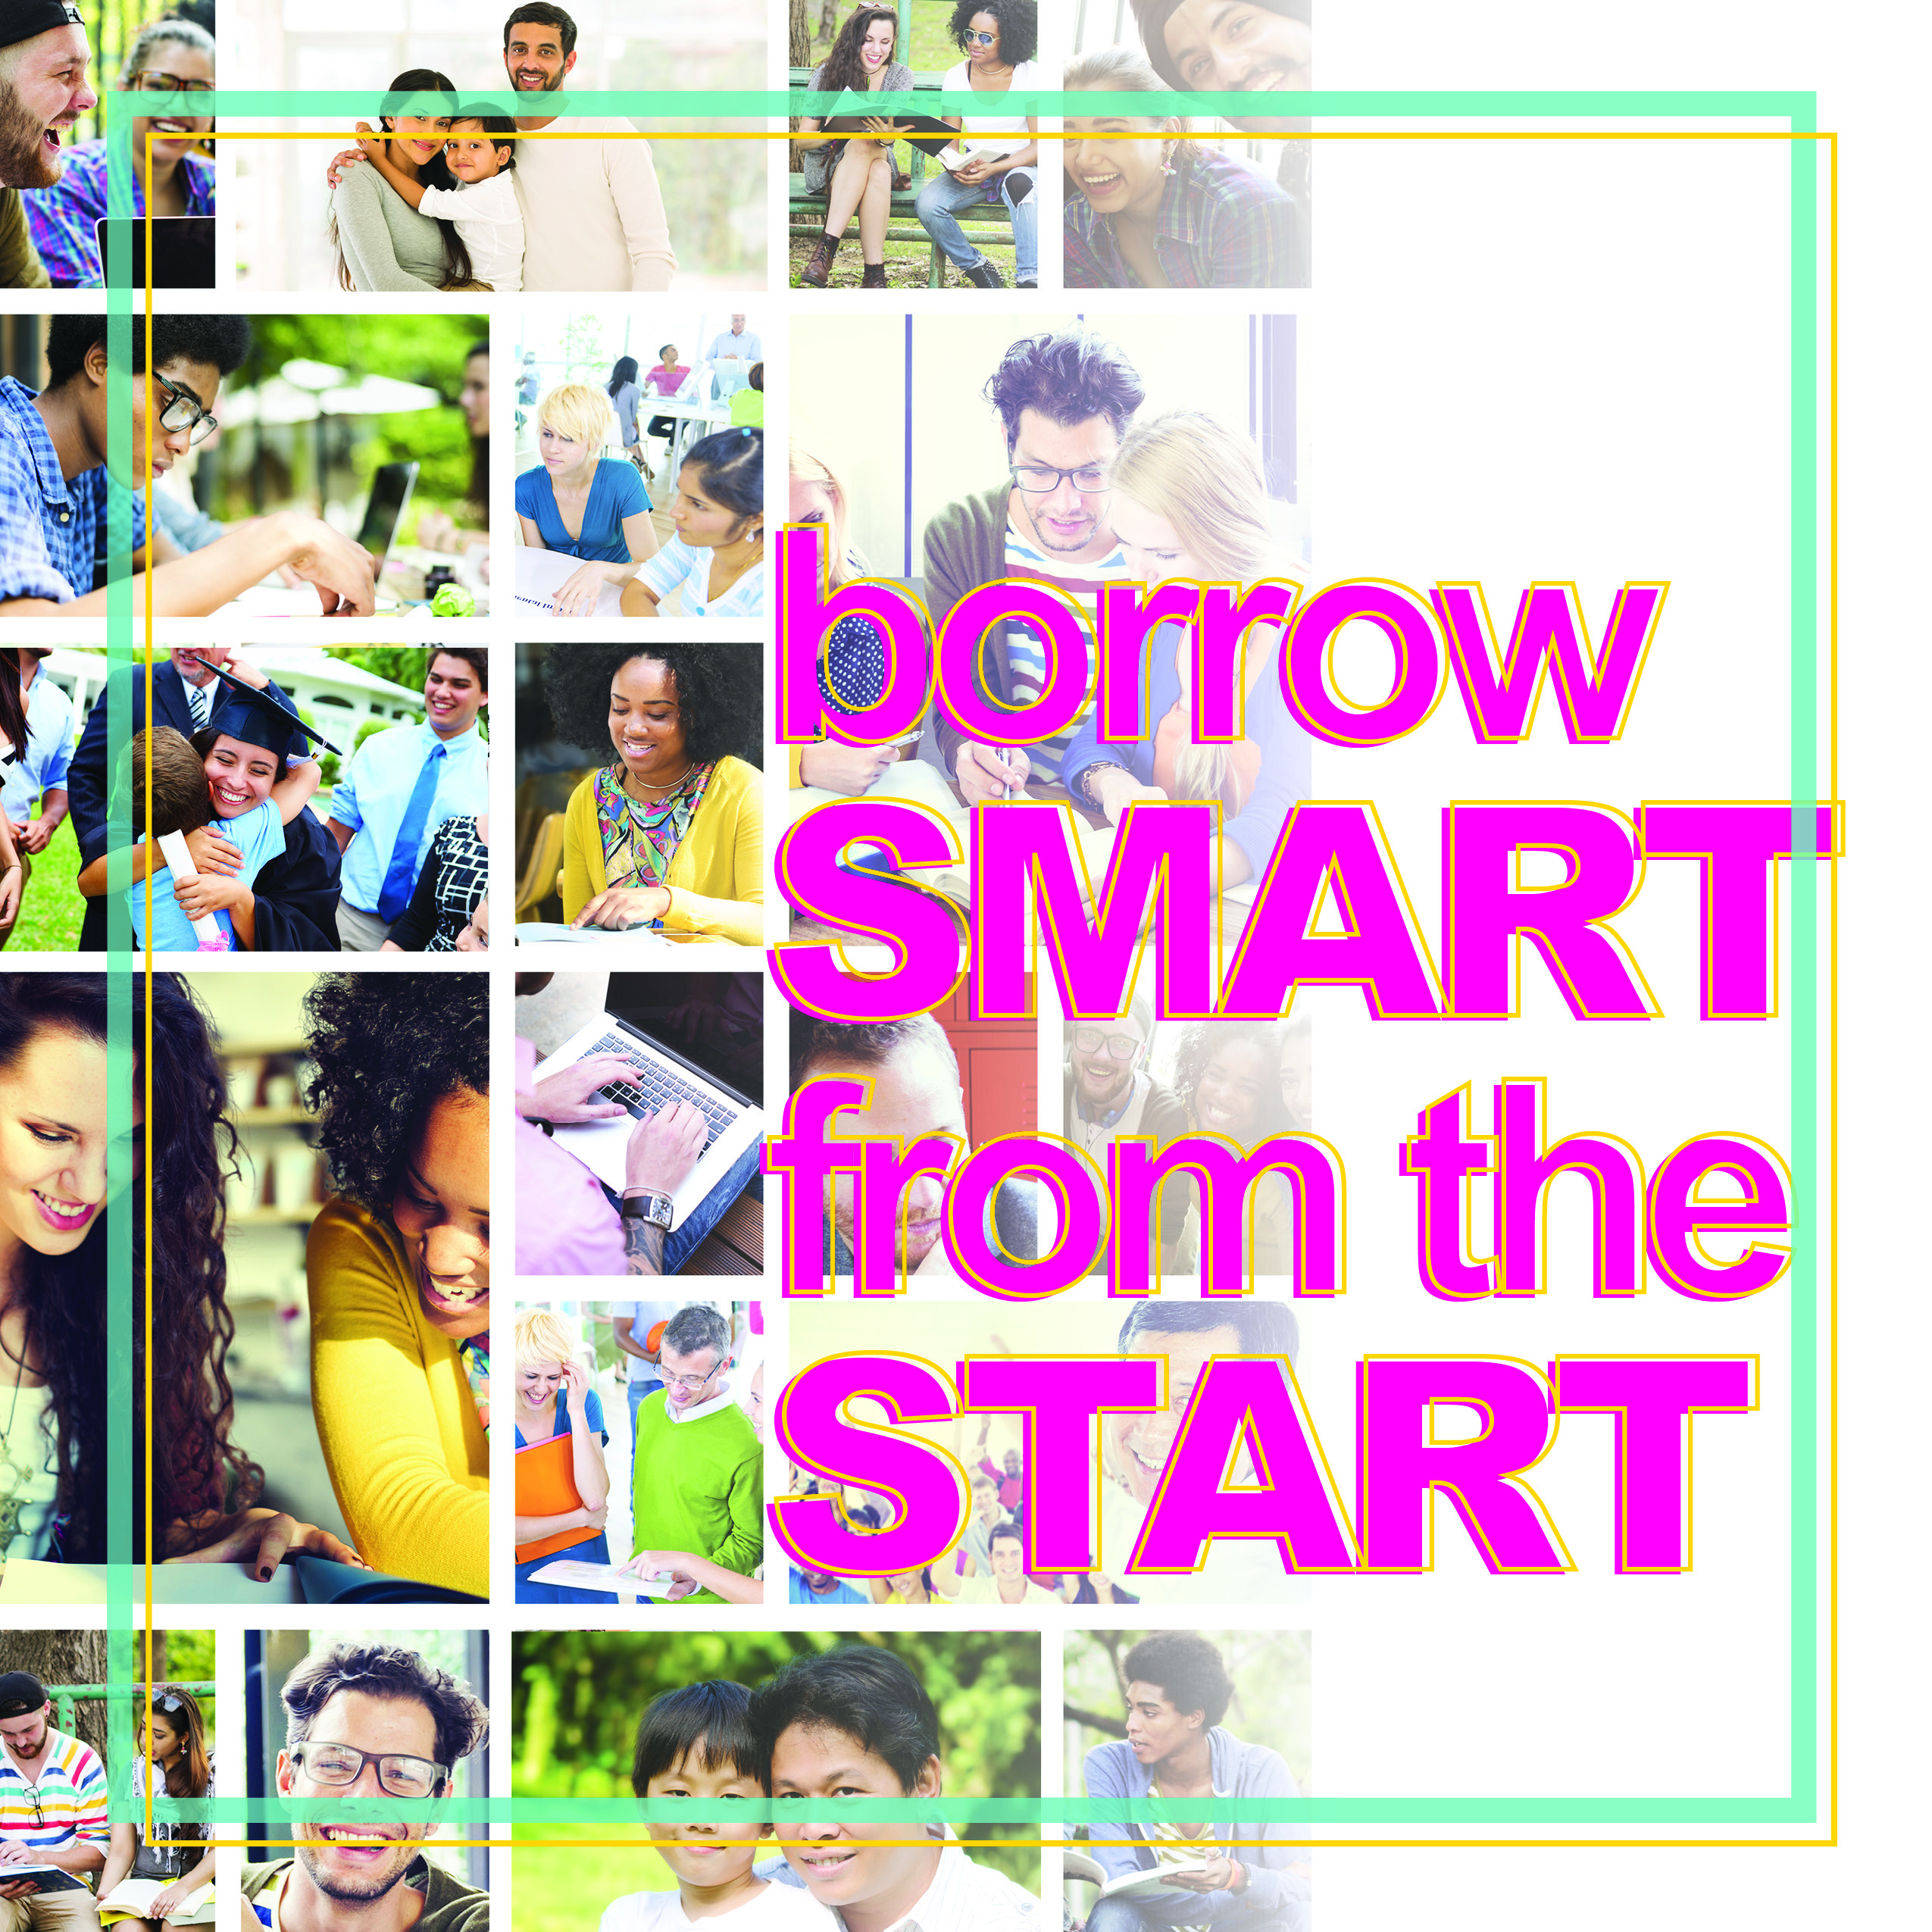 PDF of Borrow Smart From the Start Brochure opens in a new tab